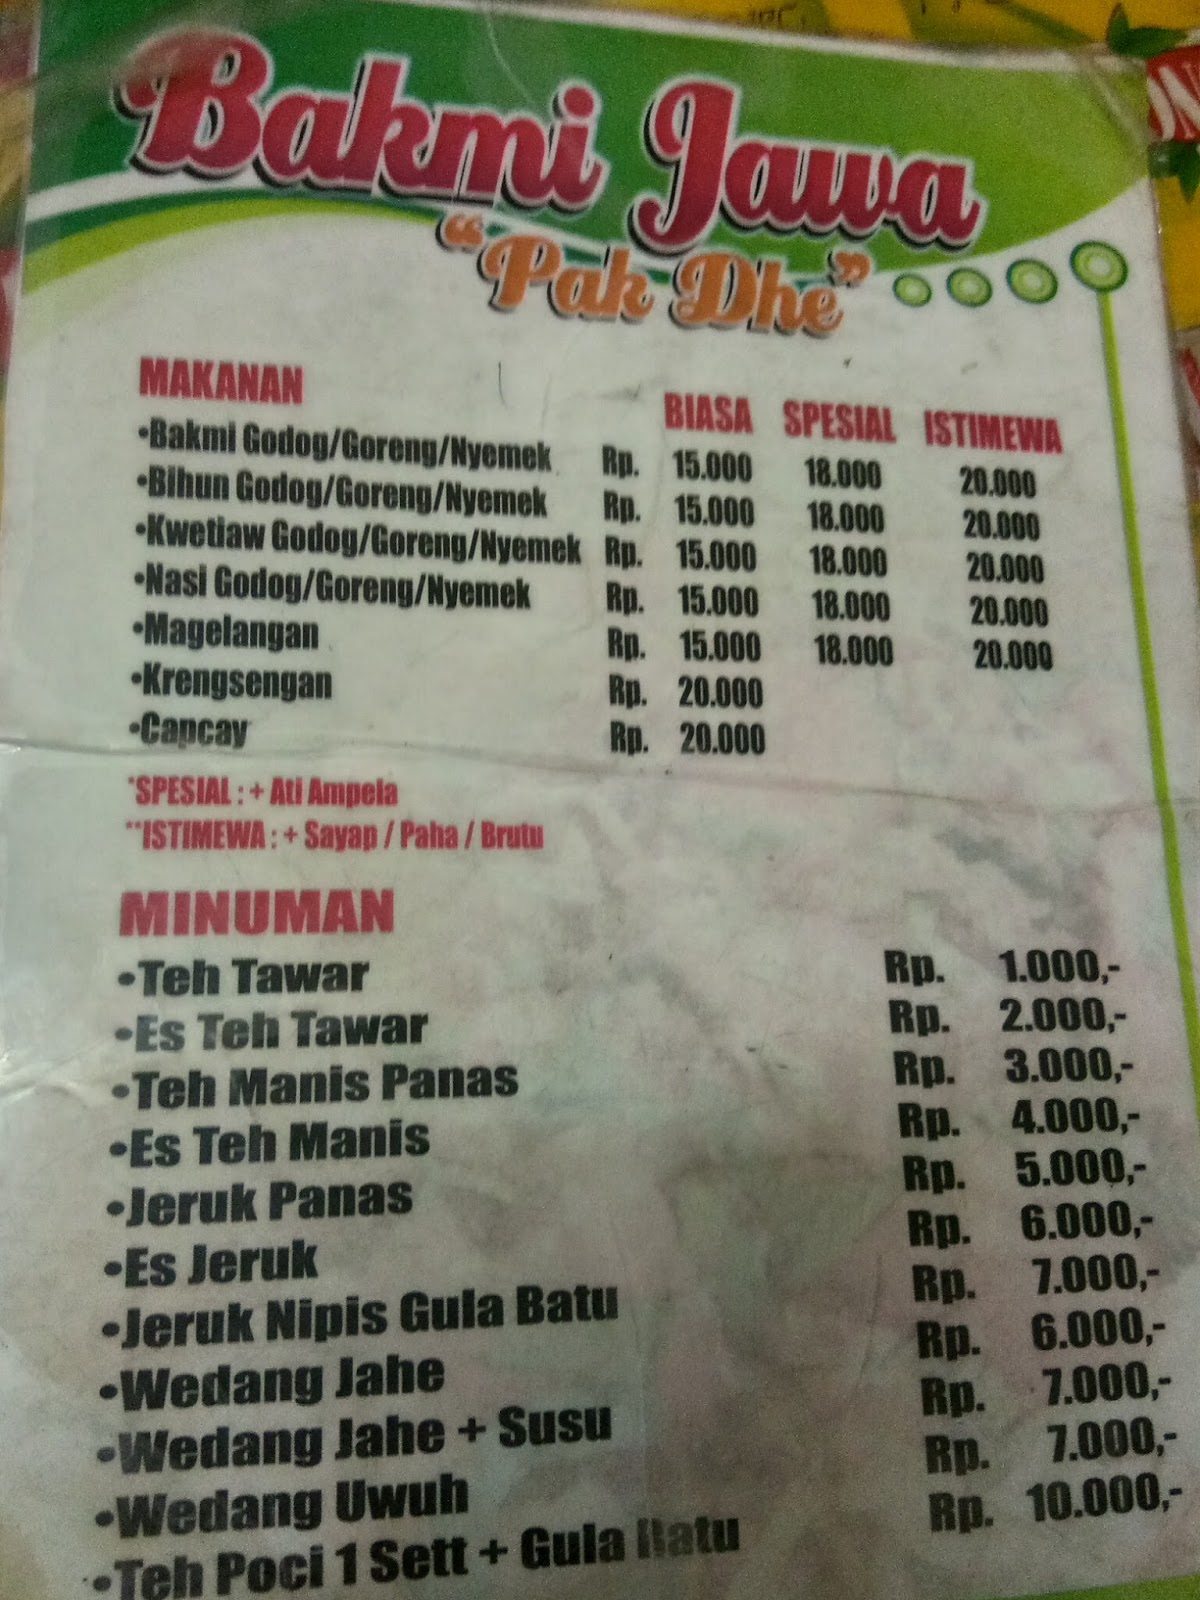 Here is the menu and price list